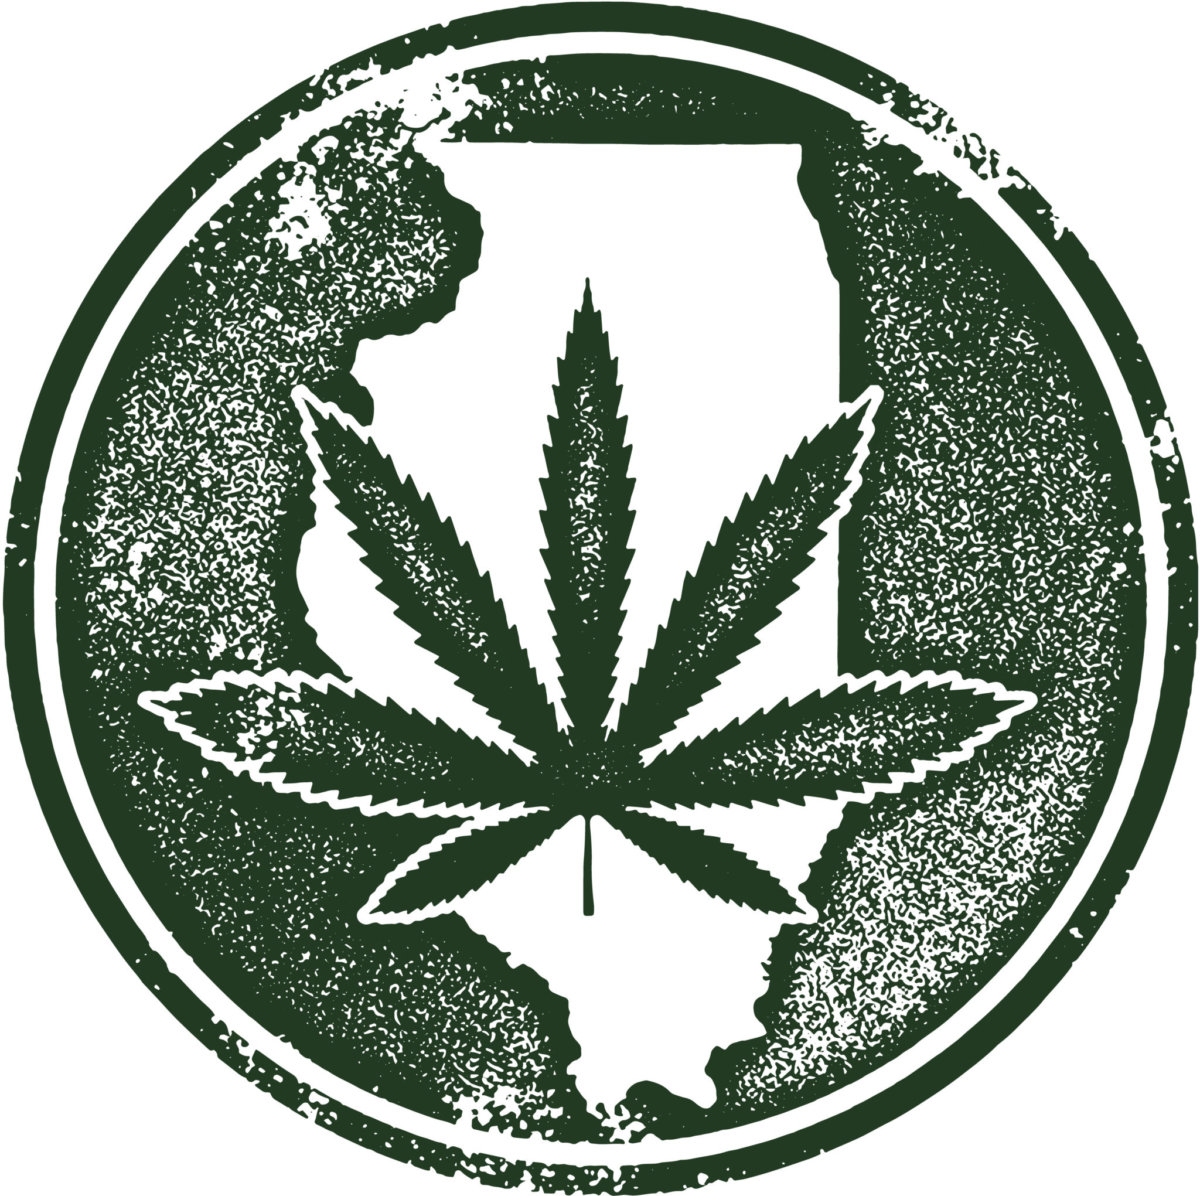 Member Blog: Legal Cannabis in Illinois – Expanded Possibilities For All